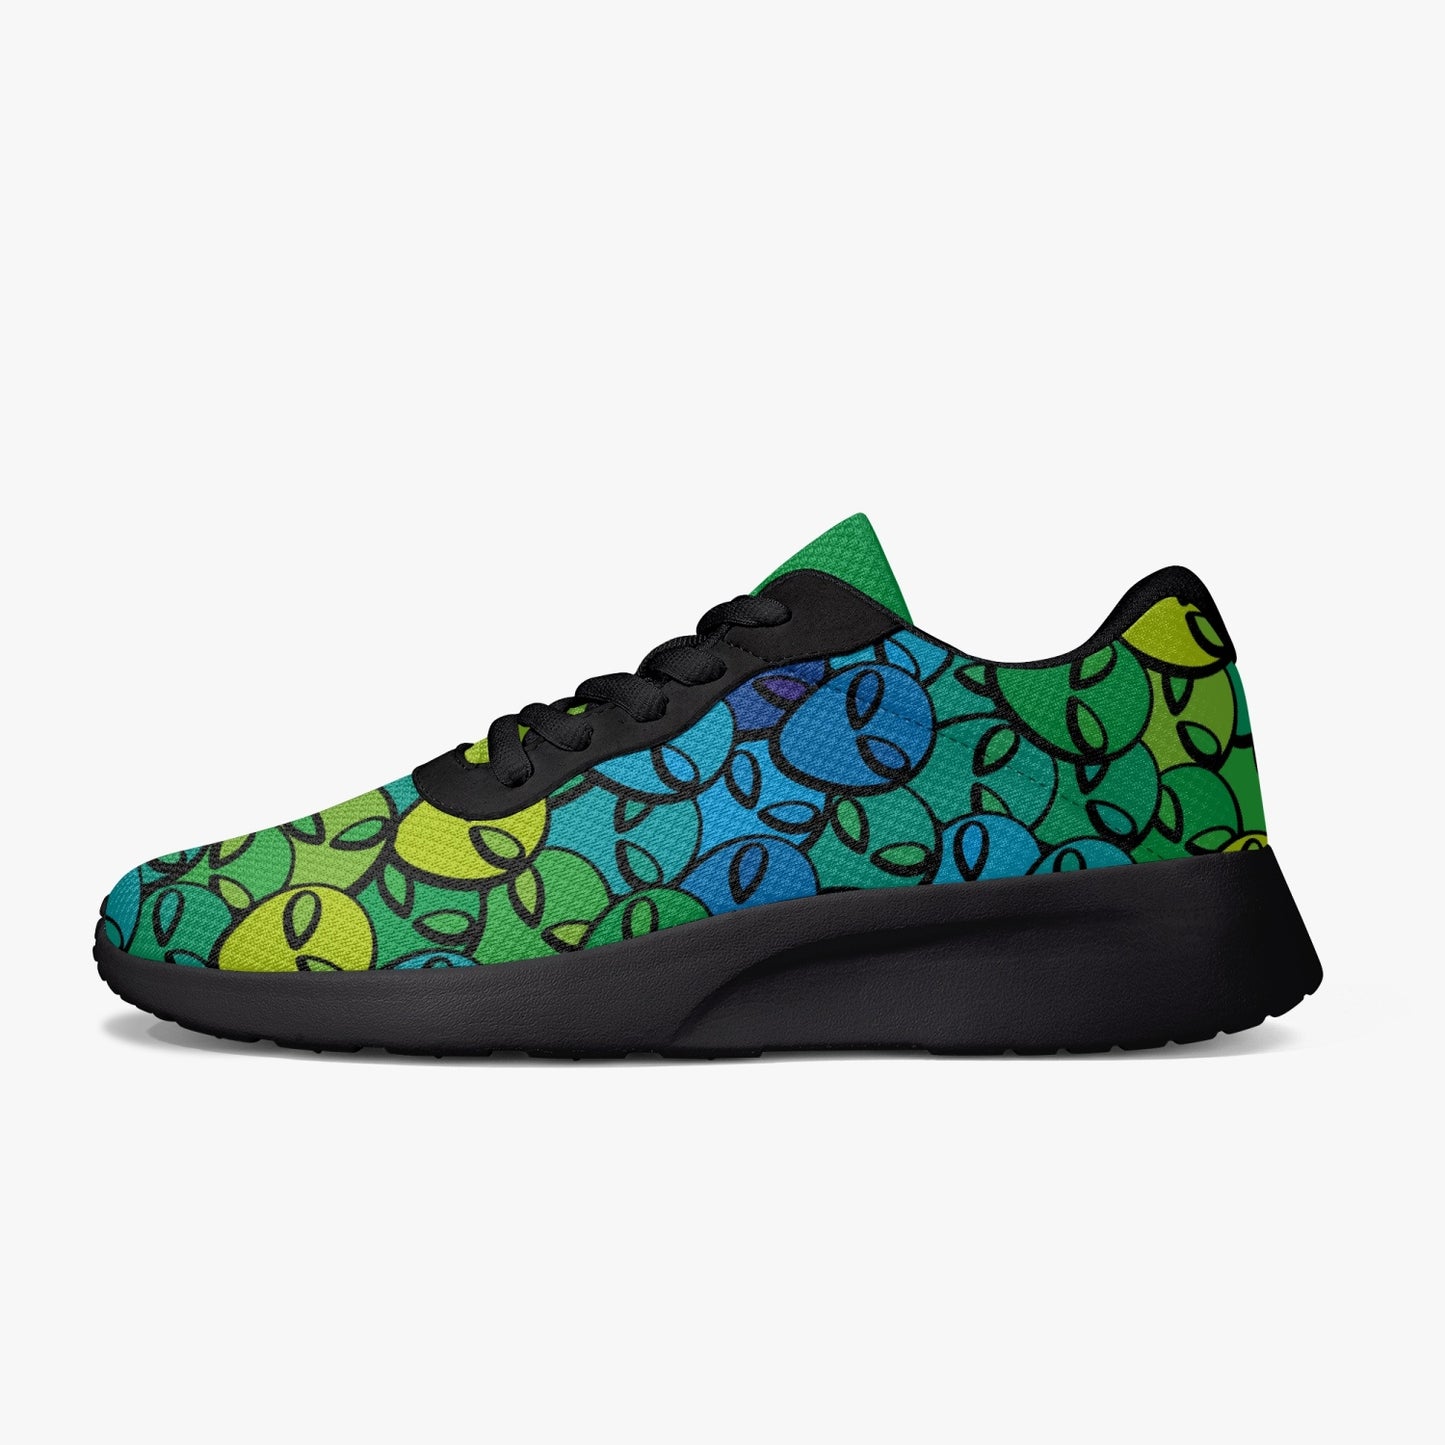 Weirdo | Black shoes with aliens! These lifestyle mesh running shoes for women have aliens printed all over the shoes and are a bit different from each other.